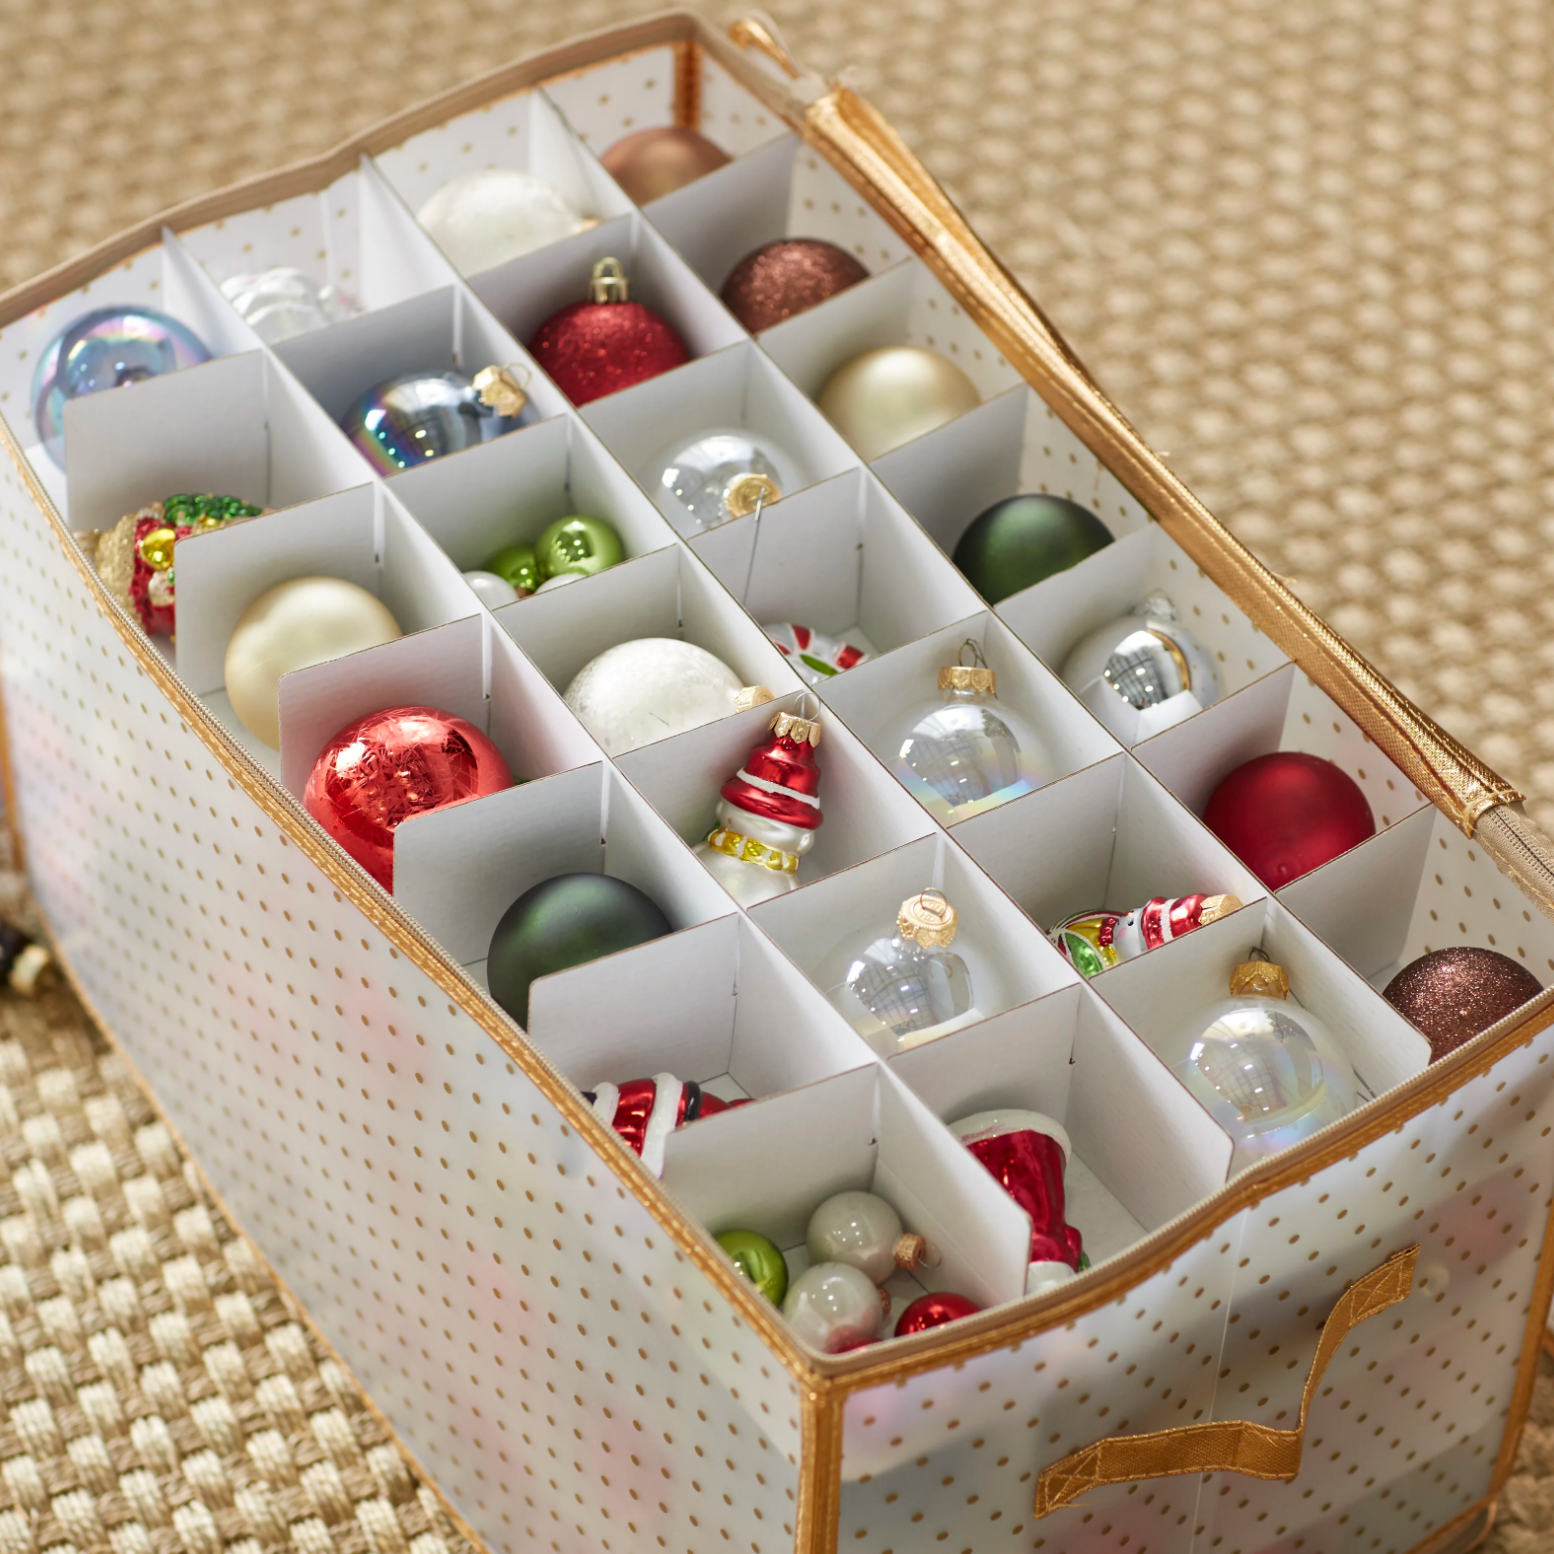 Keep Your Ornaments Safe With These Genius Storage Ideas